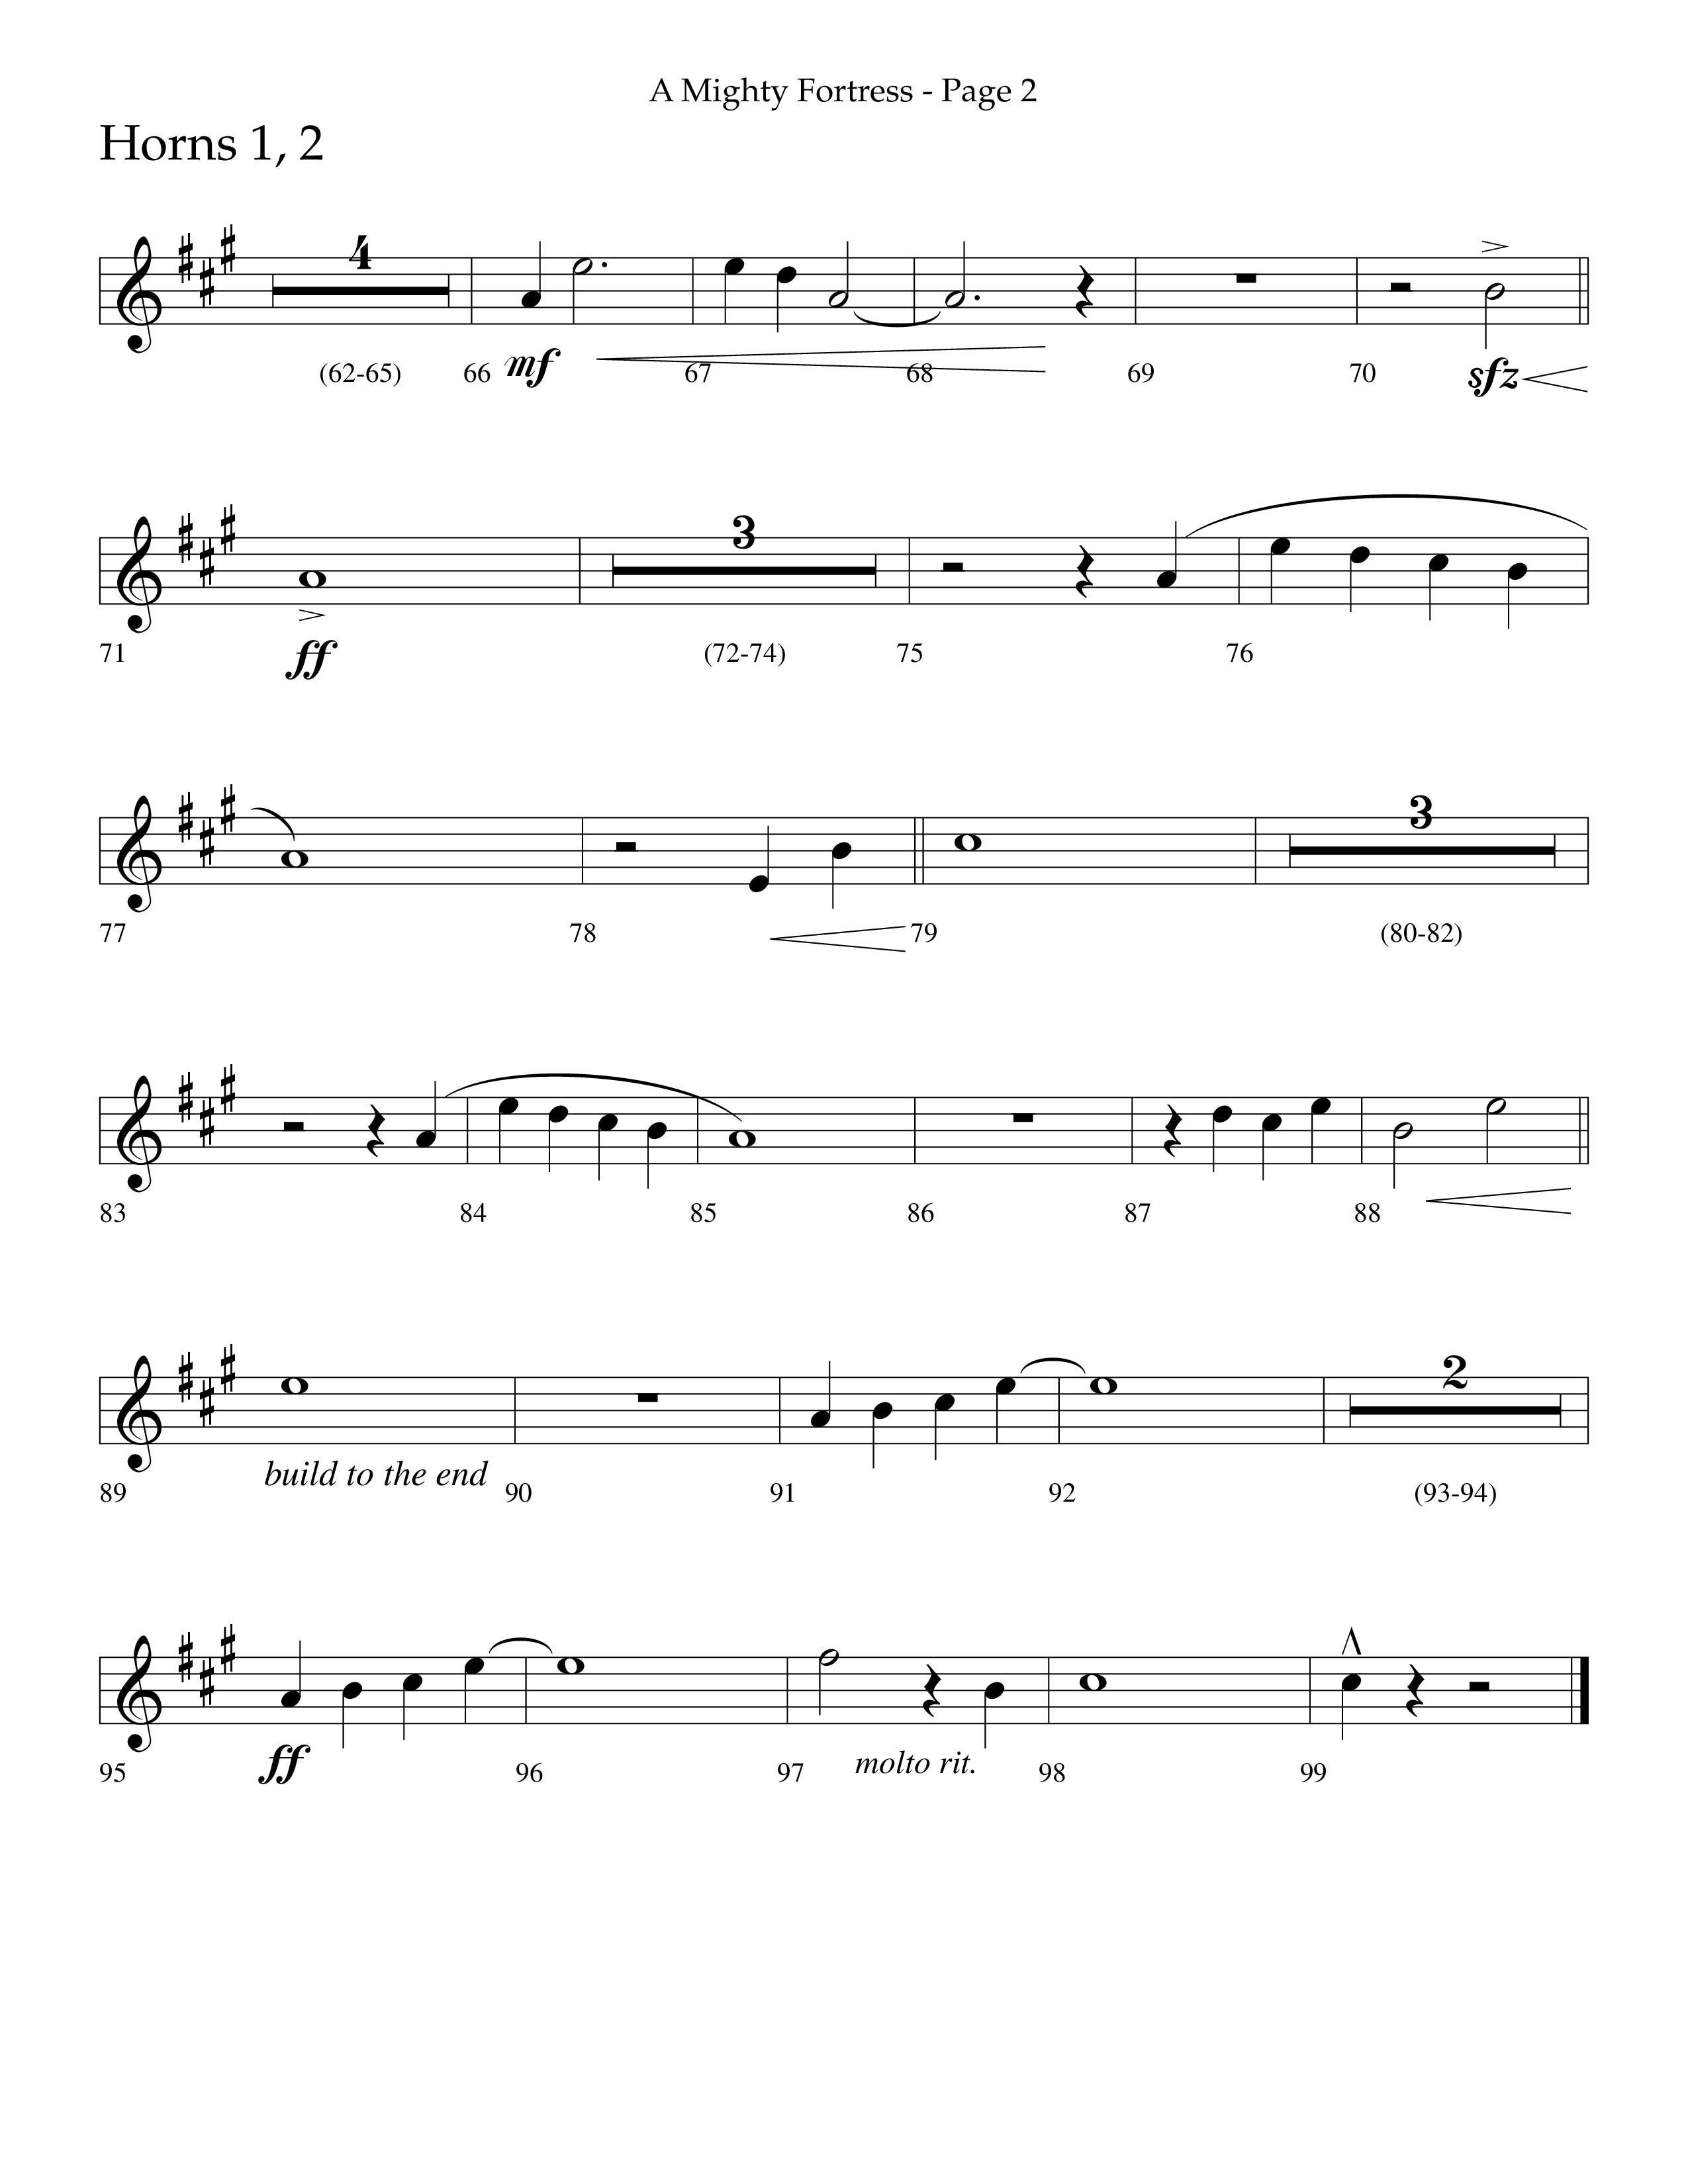 A Mighty Fortress (Choral Anthem SATB) French Horn 1/2 (Lifeway Choral / Arr. Cliff Duren)